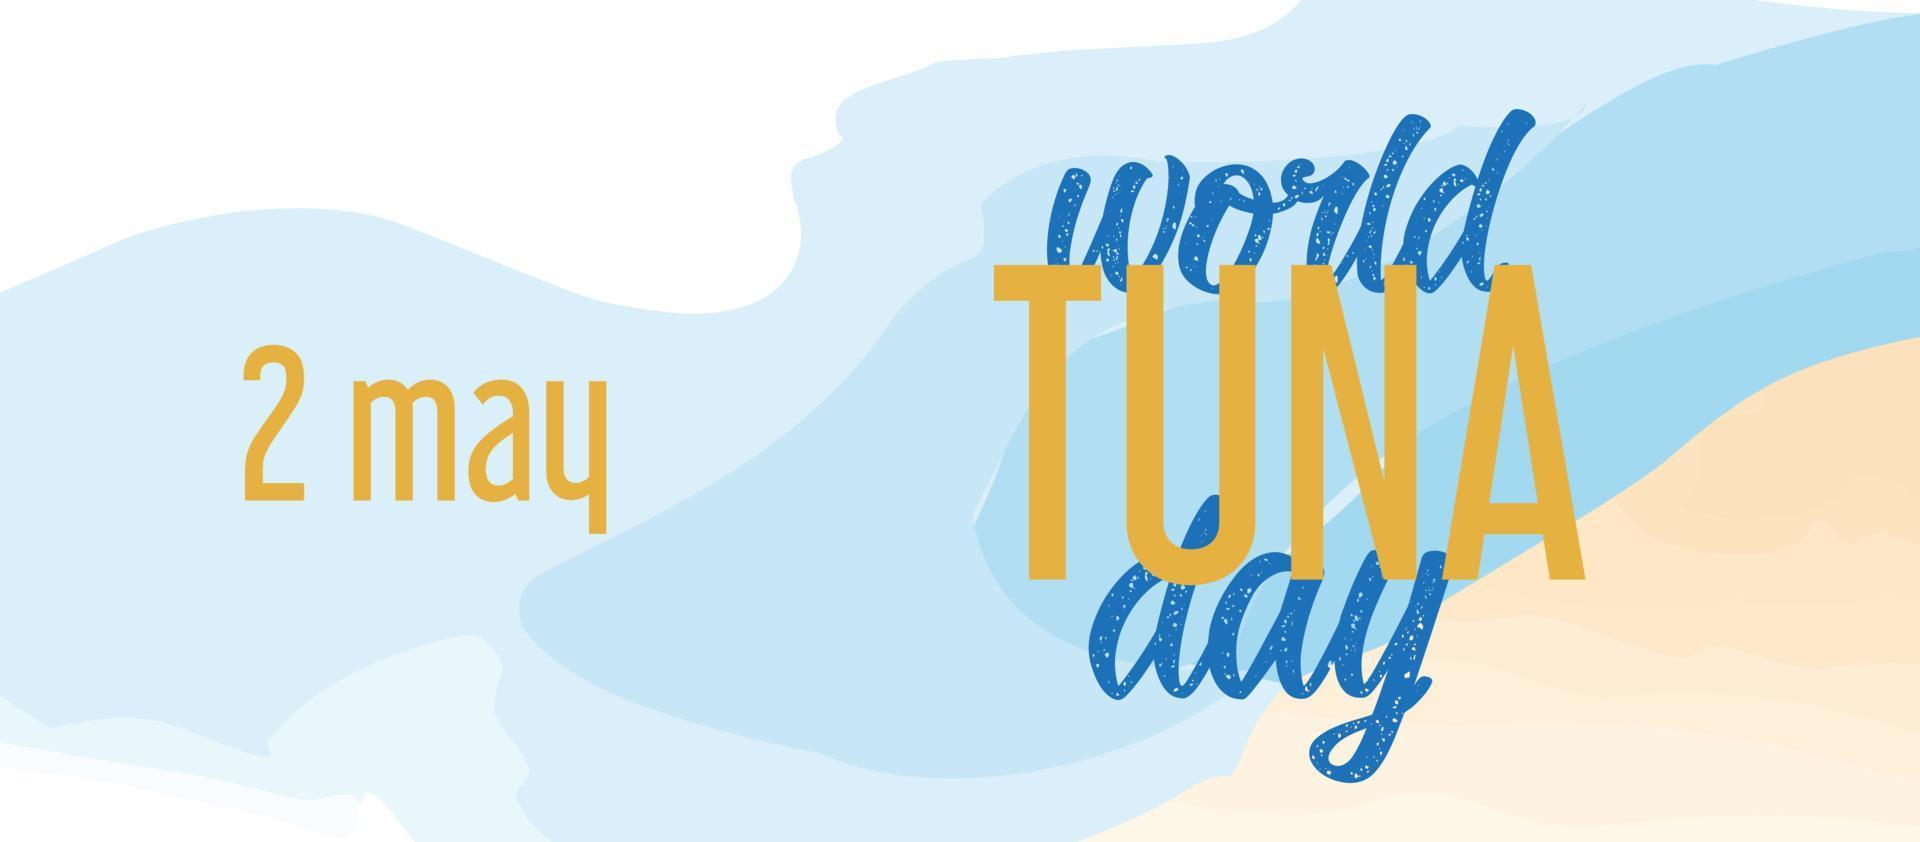 Vector illustration world tuna day 2 may. Background, banner, card, poster with text lettering. In blue marine colors.